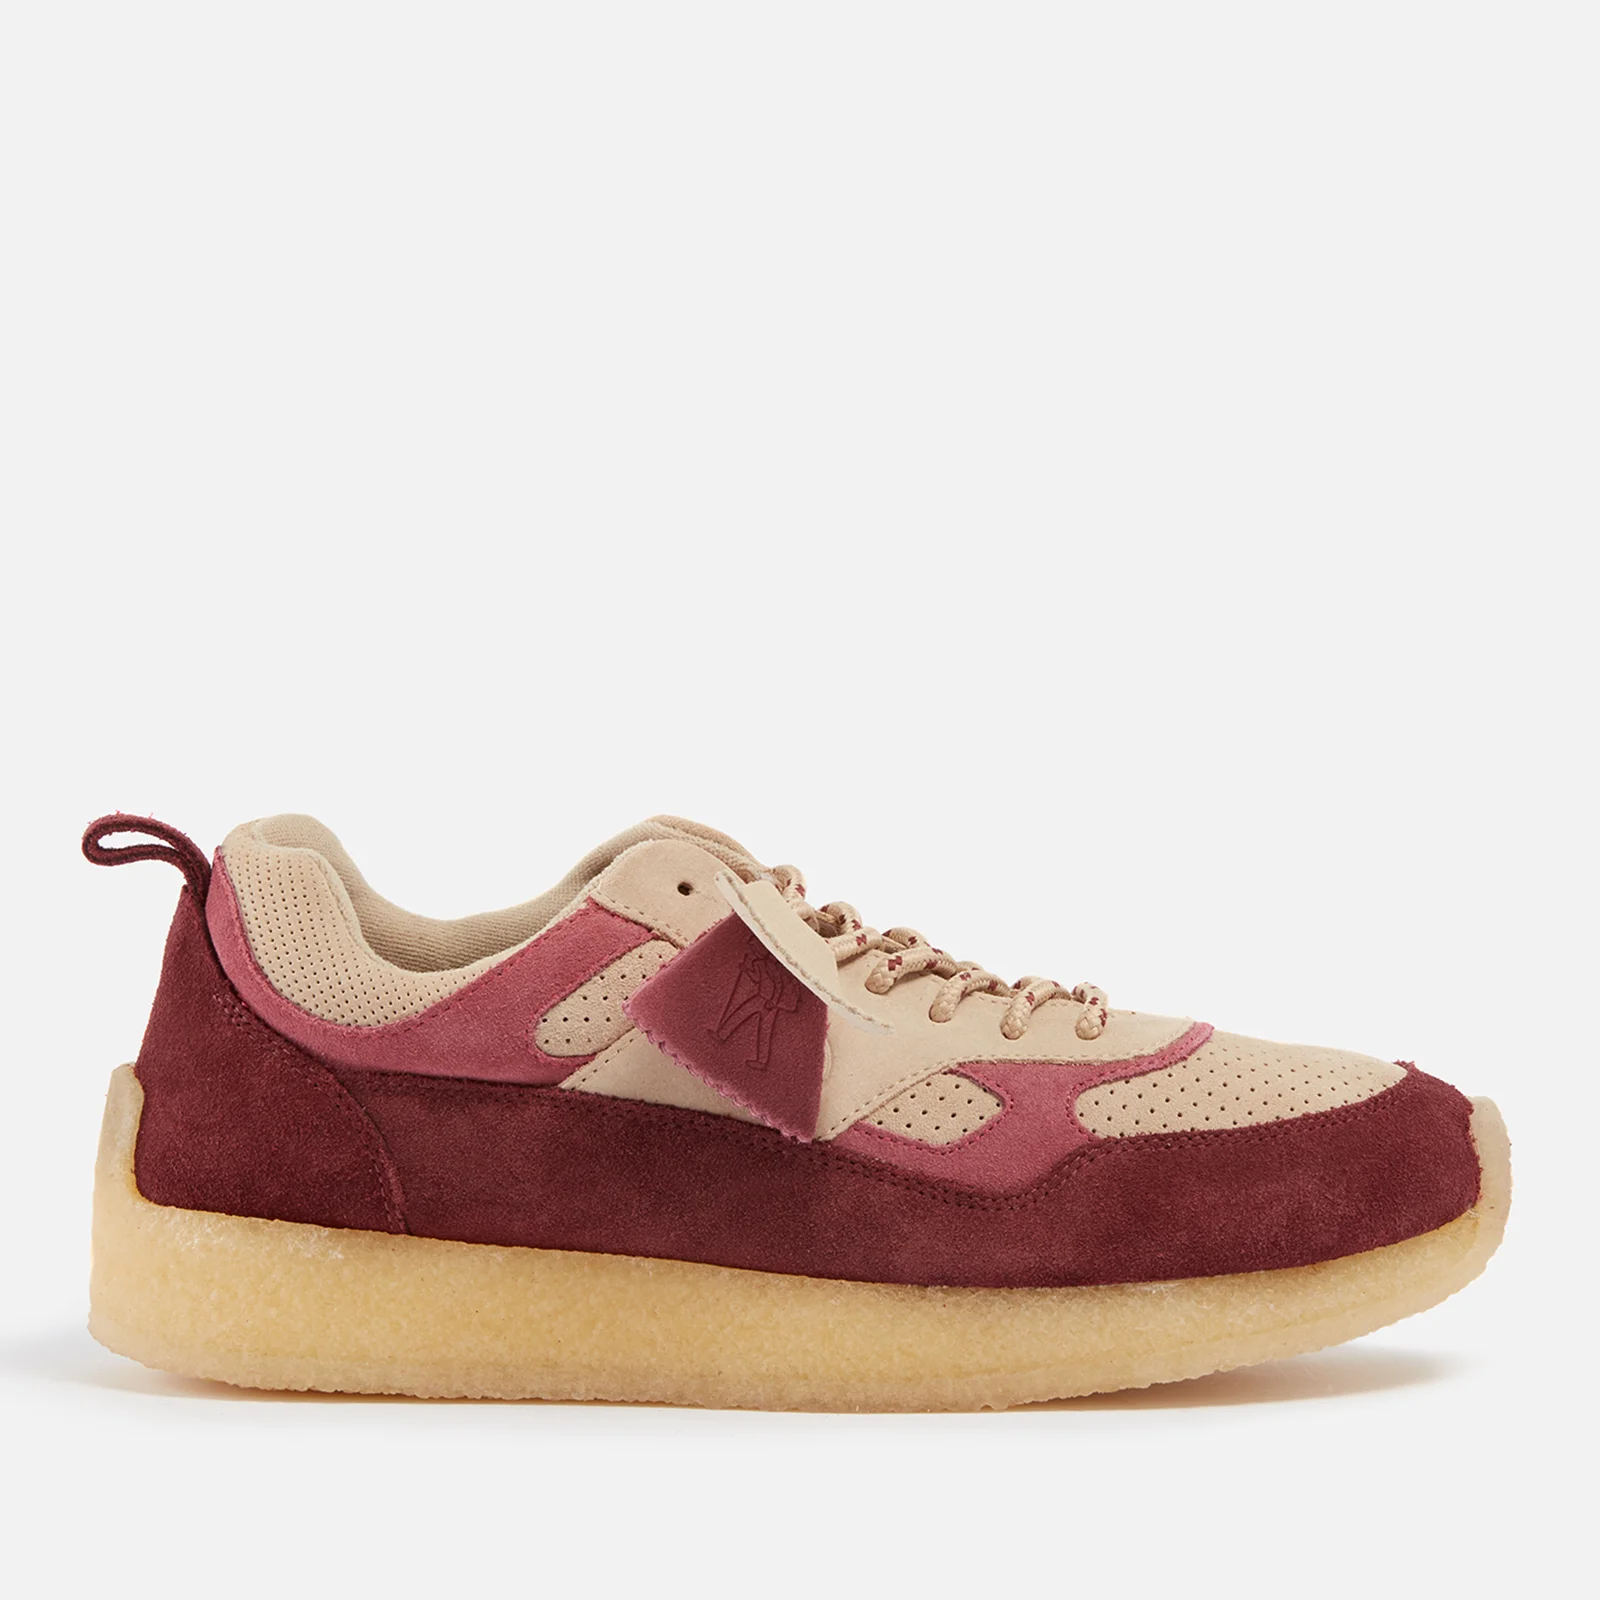 Clarks Originals X Ronnie Fieg Lockhill Suede and Mesh Trainers Image 1